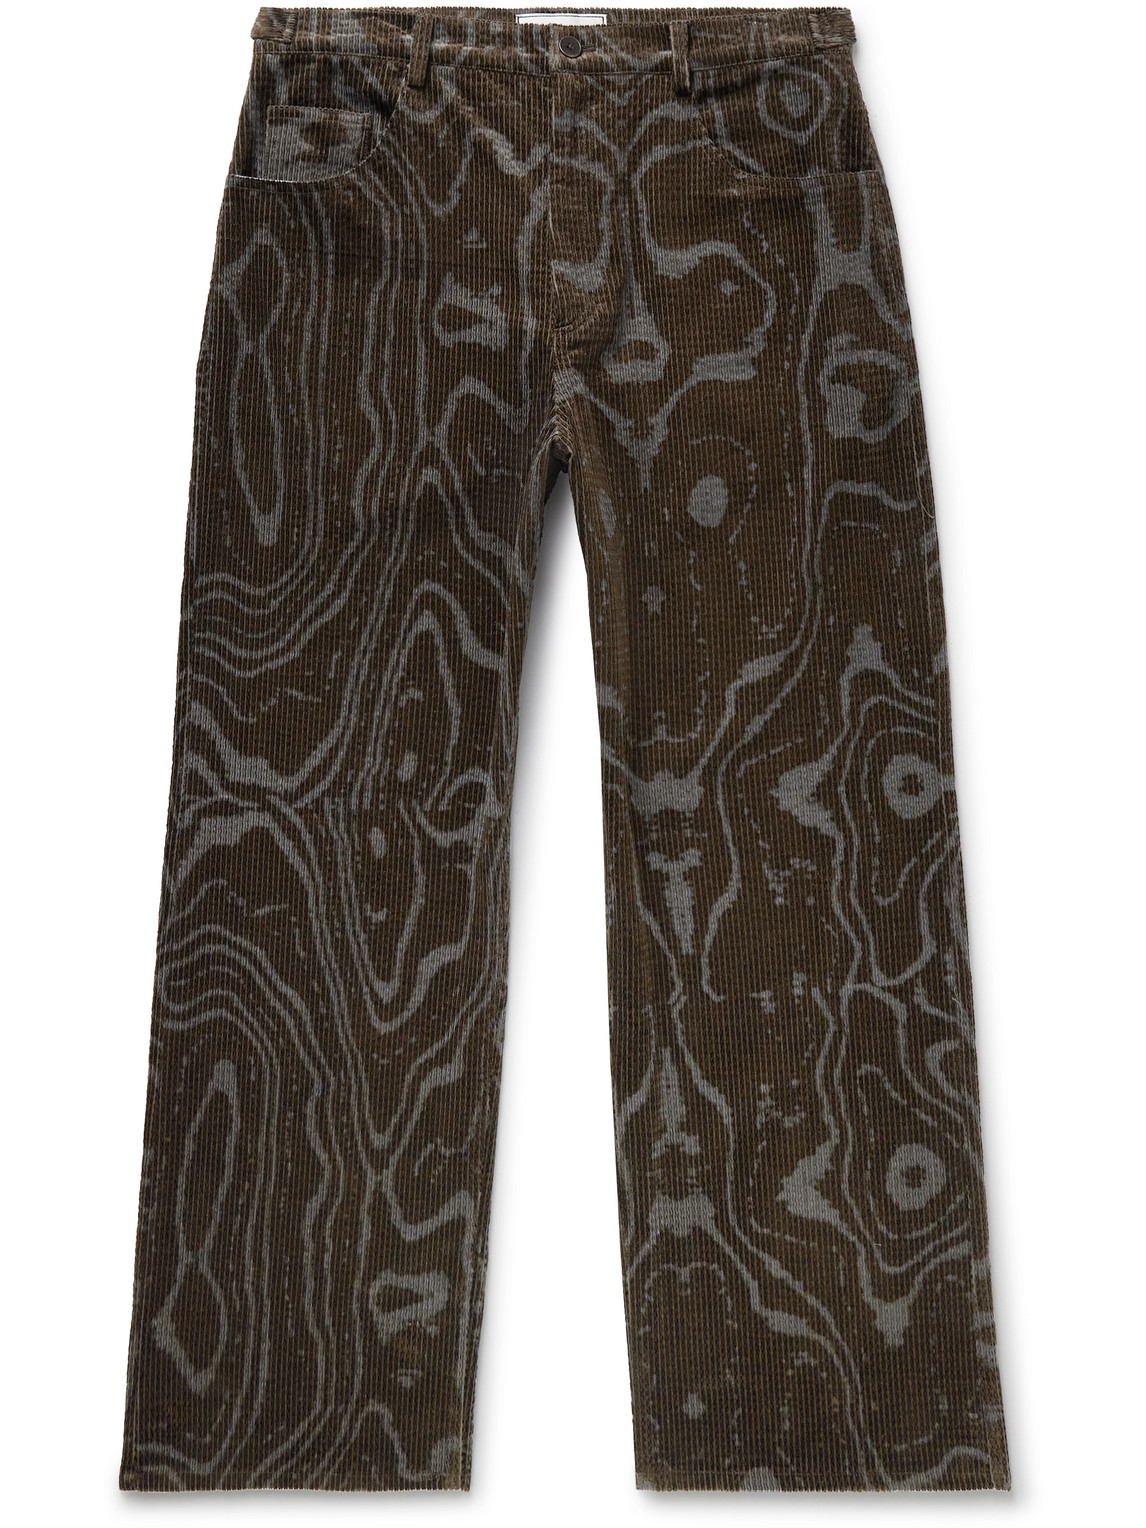 Small Talk Throwing Fits Straight-leg Printed Cotton-blend Corduroy Trousers In Brown